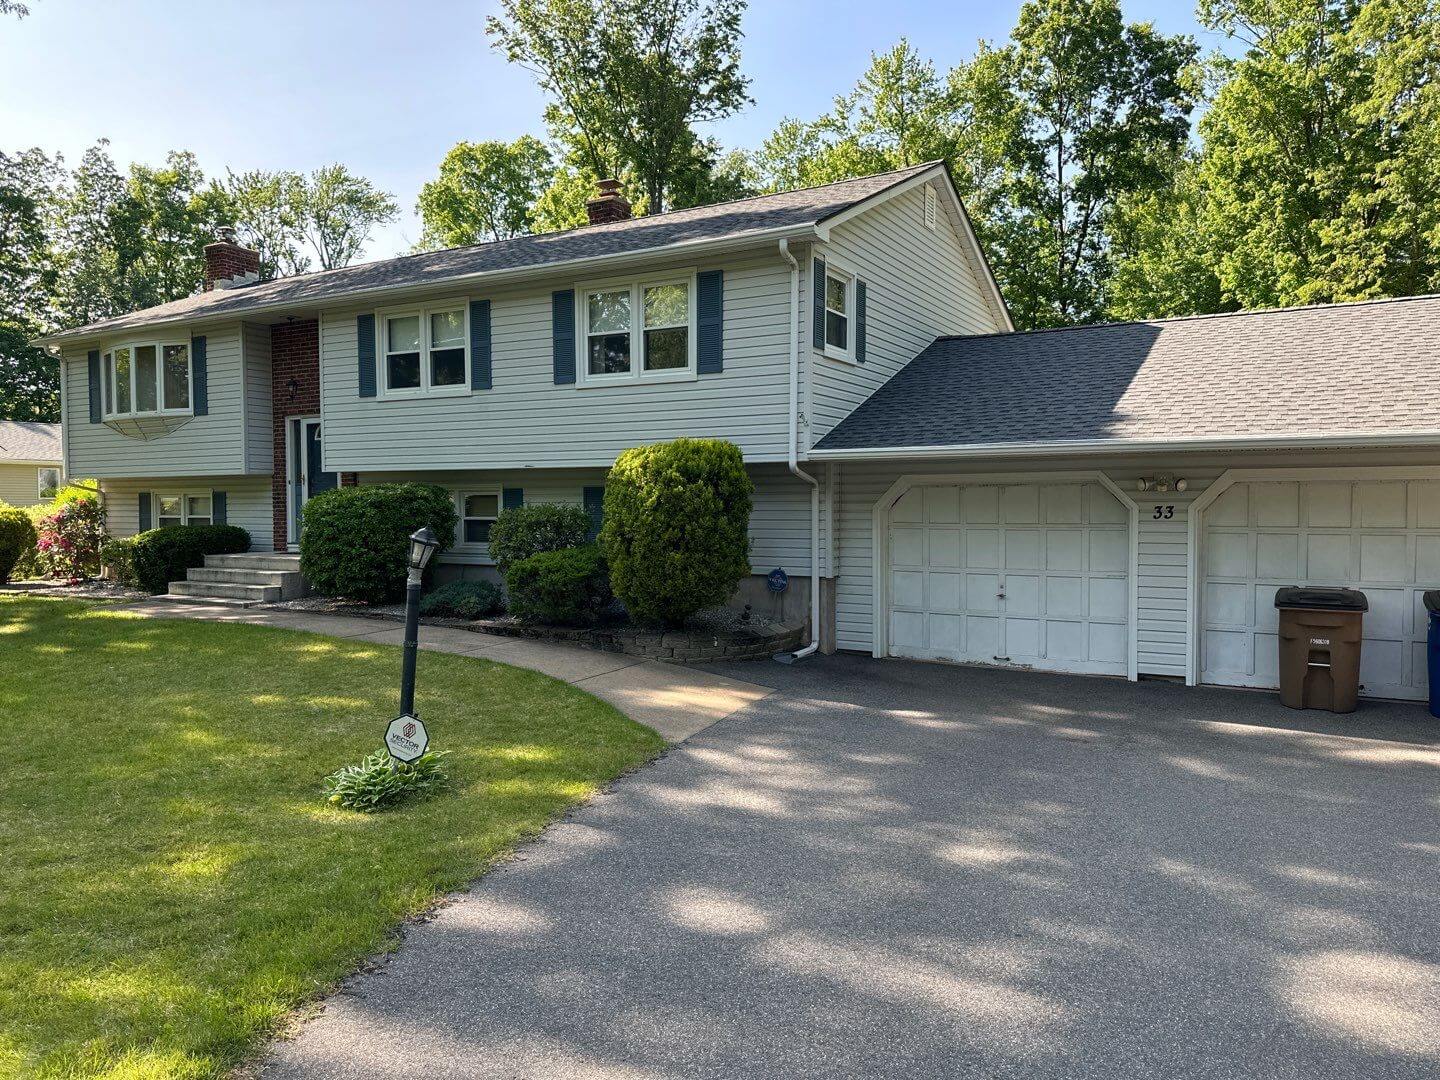 A split level home with new roofing and siding in Plantsville, CT